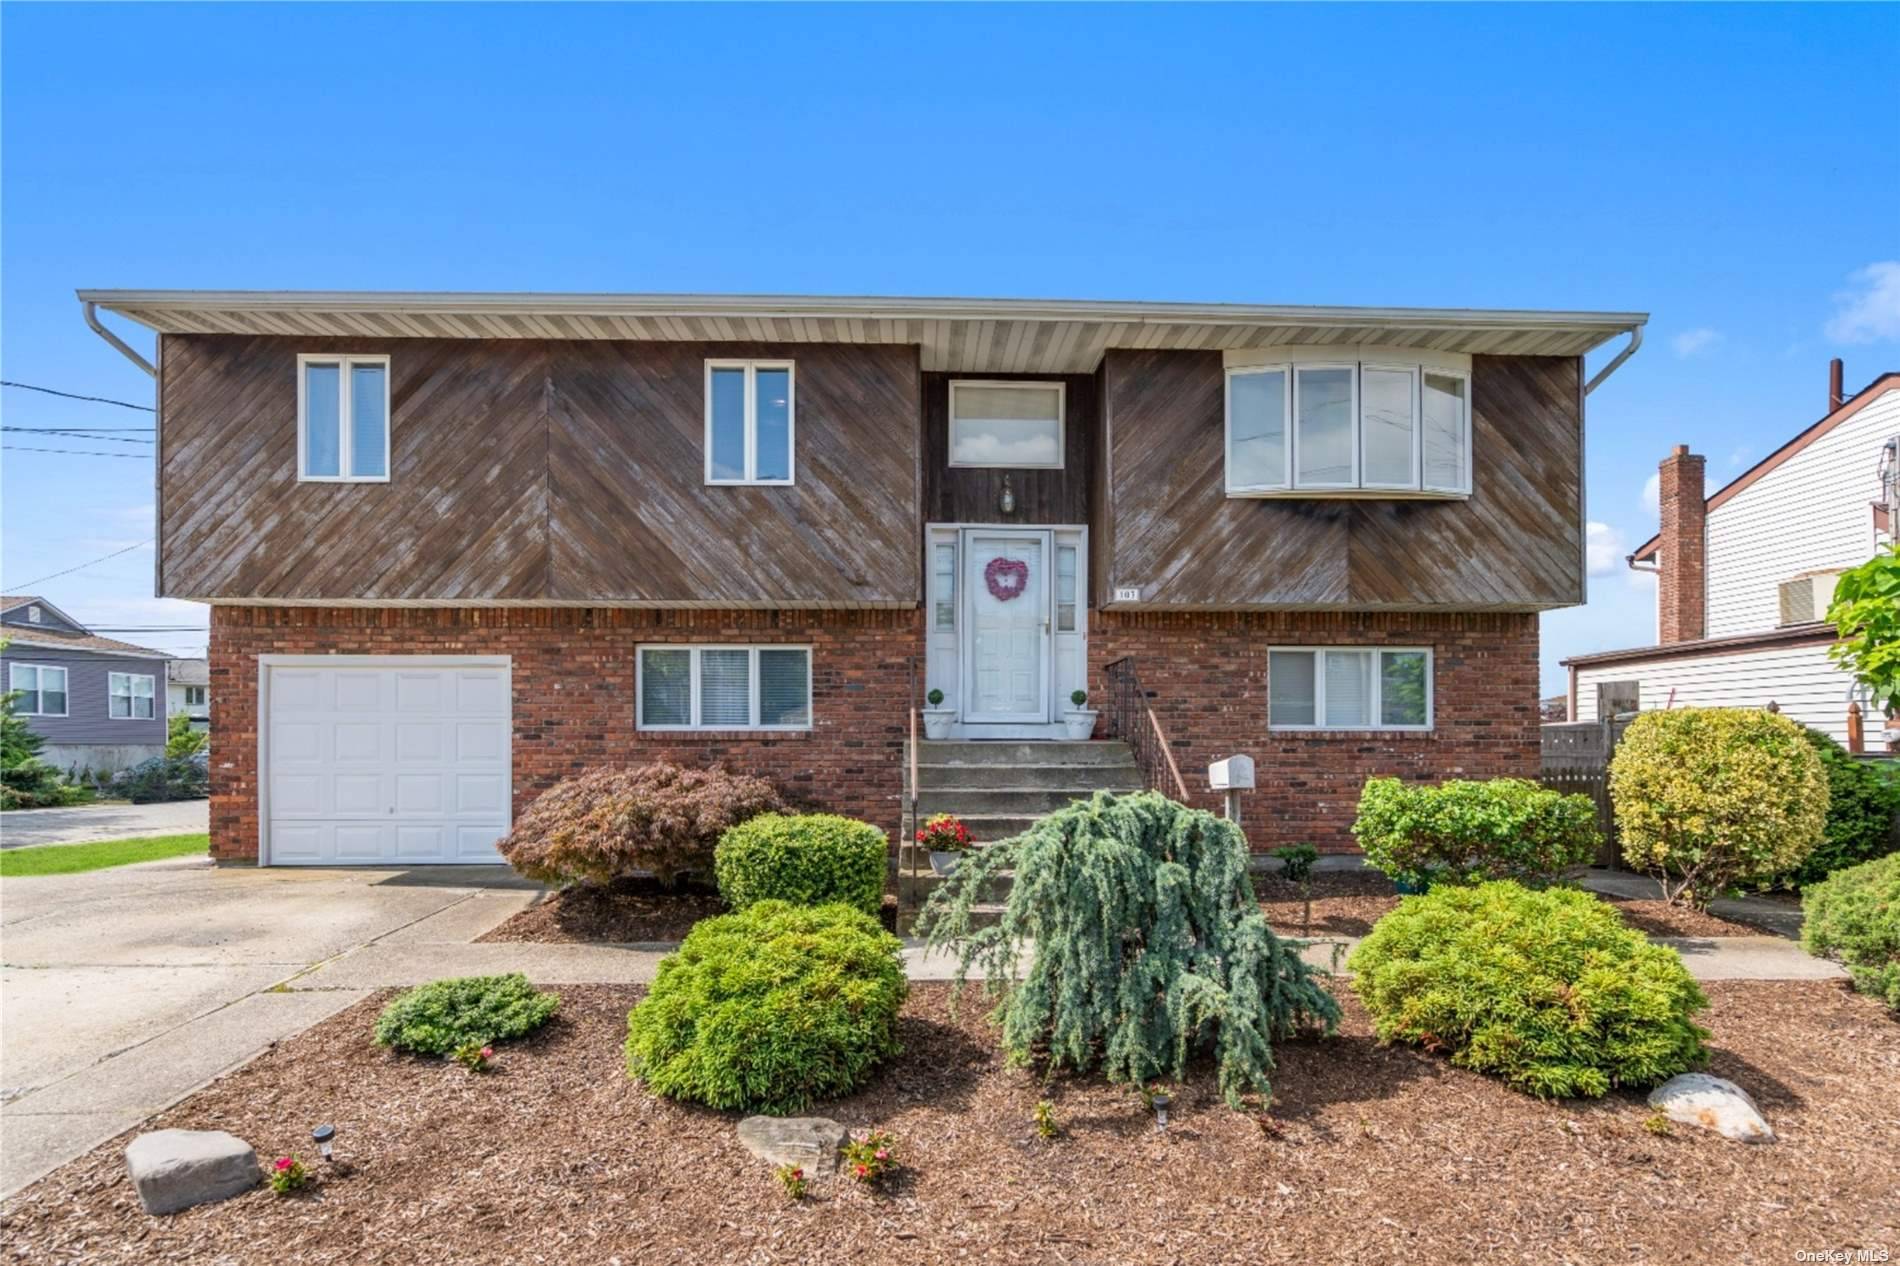 LINDY VILLAGE WATERFRONT over 2300 SF, this Hi Ranch boasts open airy fully updated EIK with Island, Granite countertops, Formal Dining Room with sliders to upper deck overlooking the water.